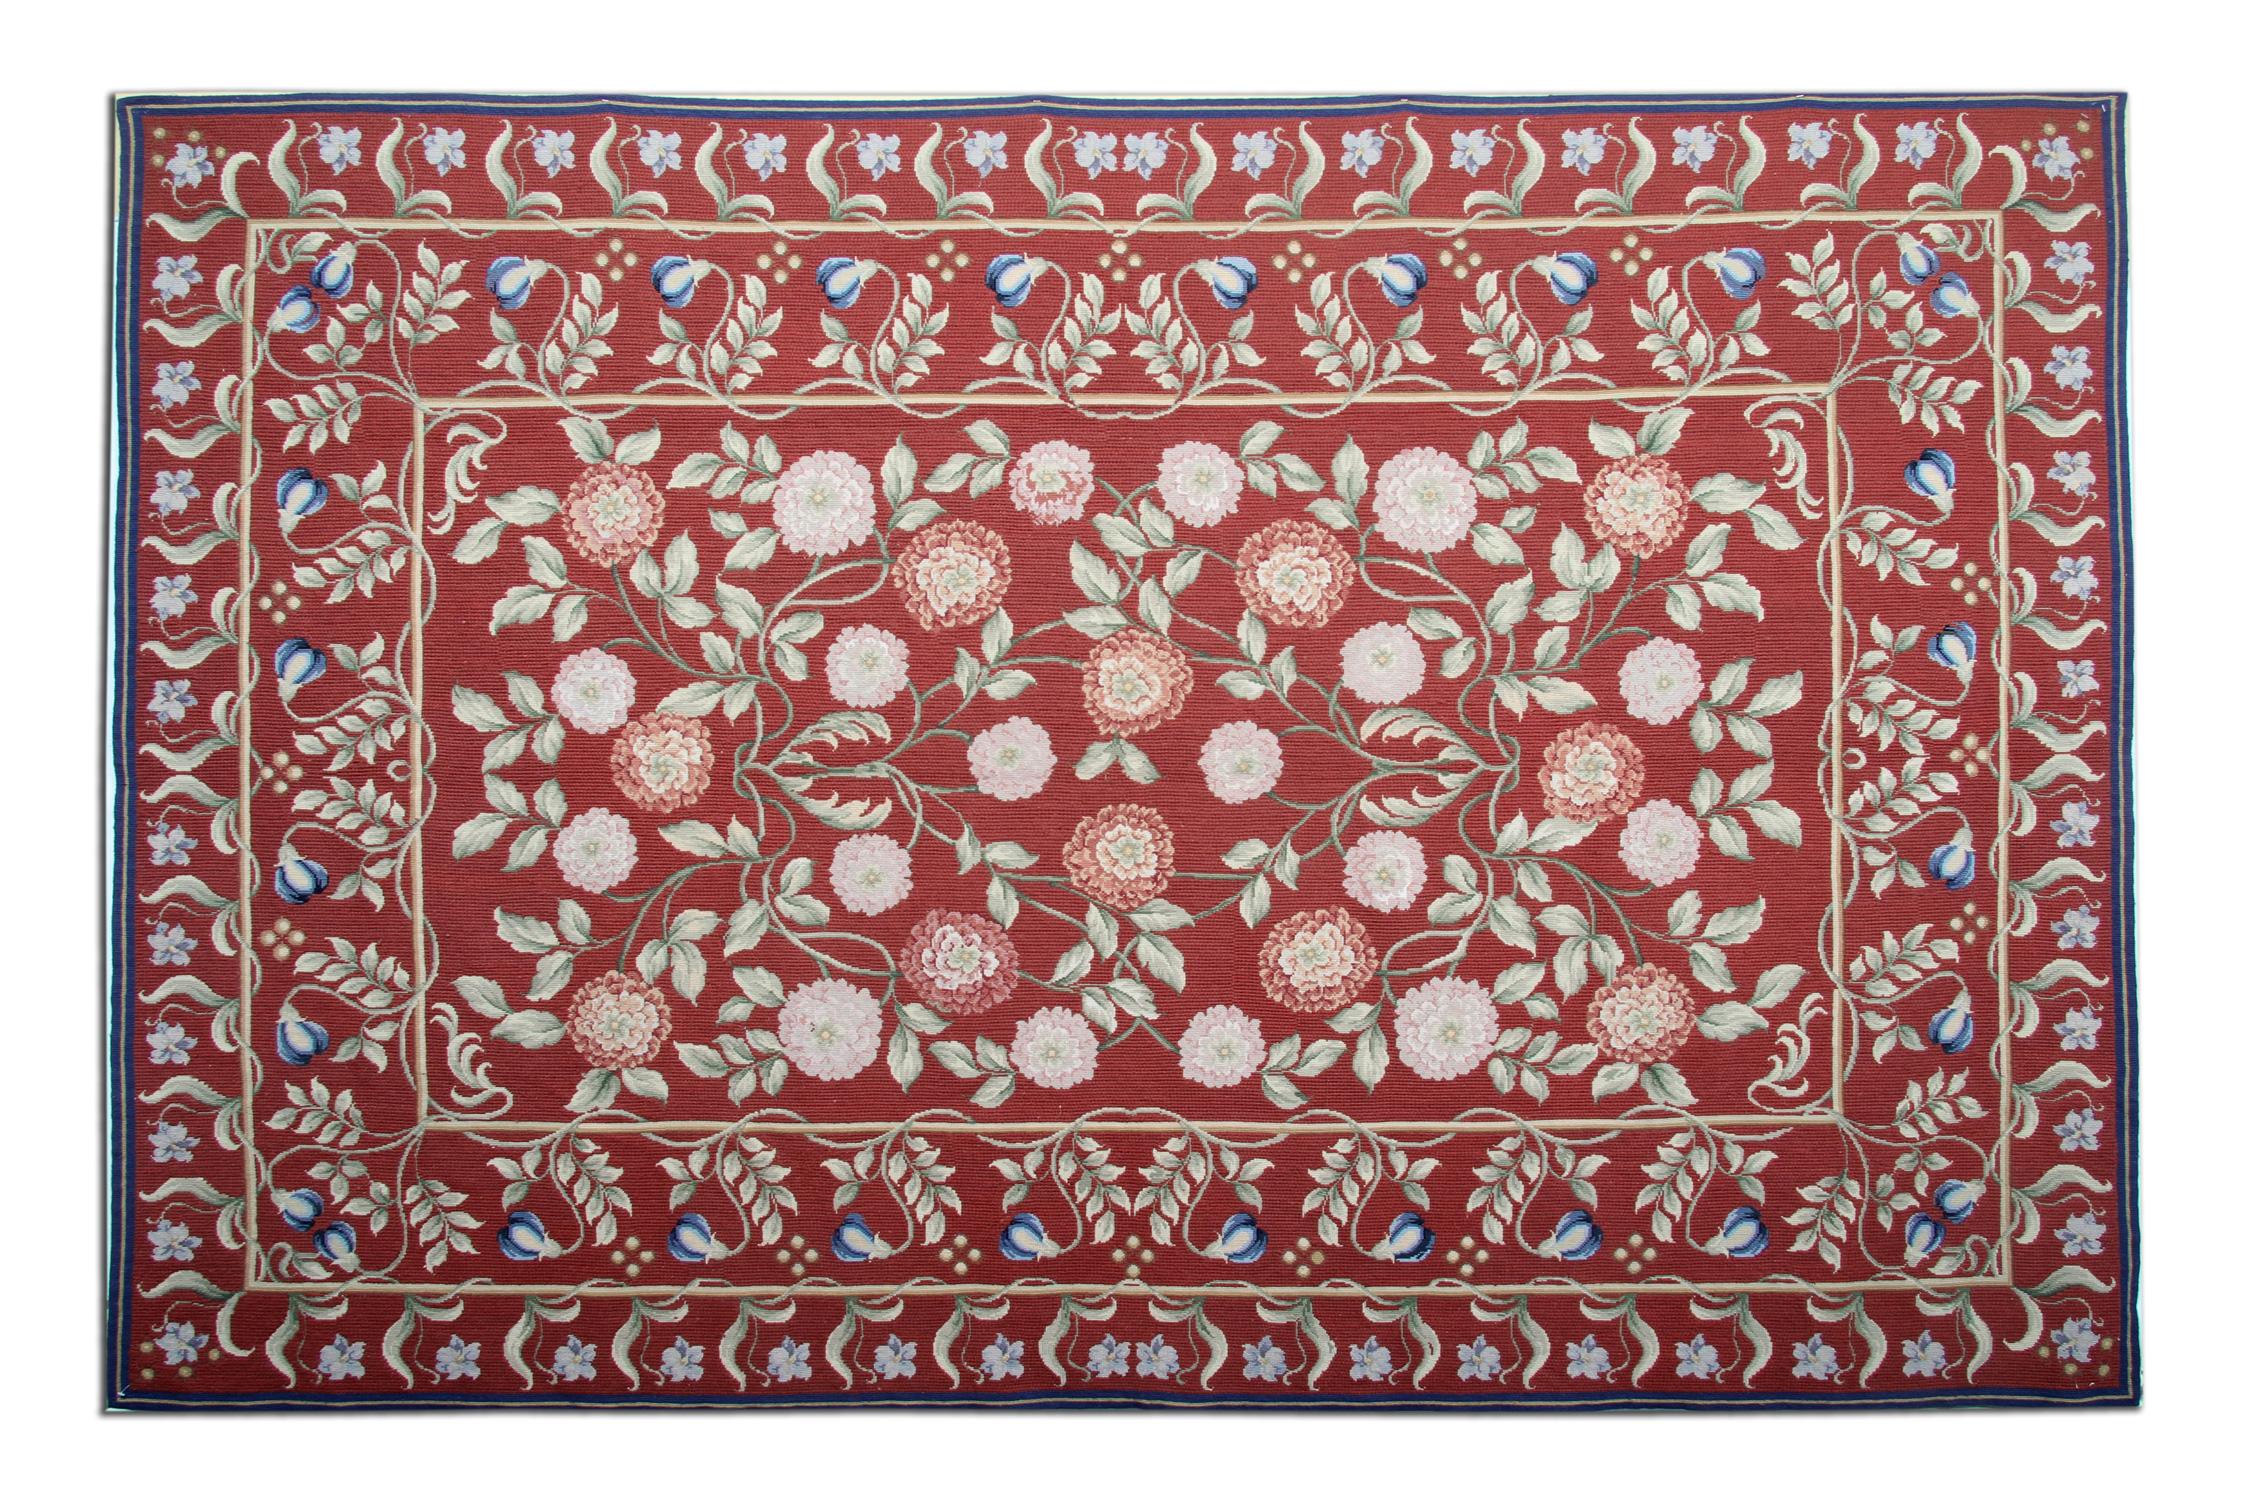 This beautifully handwoven Aubusson rug is sure to make a great accent piece in any room it’s introduced too. Deep red sits as the background colour, which has then been decorated with a pink, green and blue, symmetrical floral arrangement. The